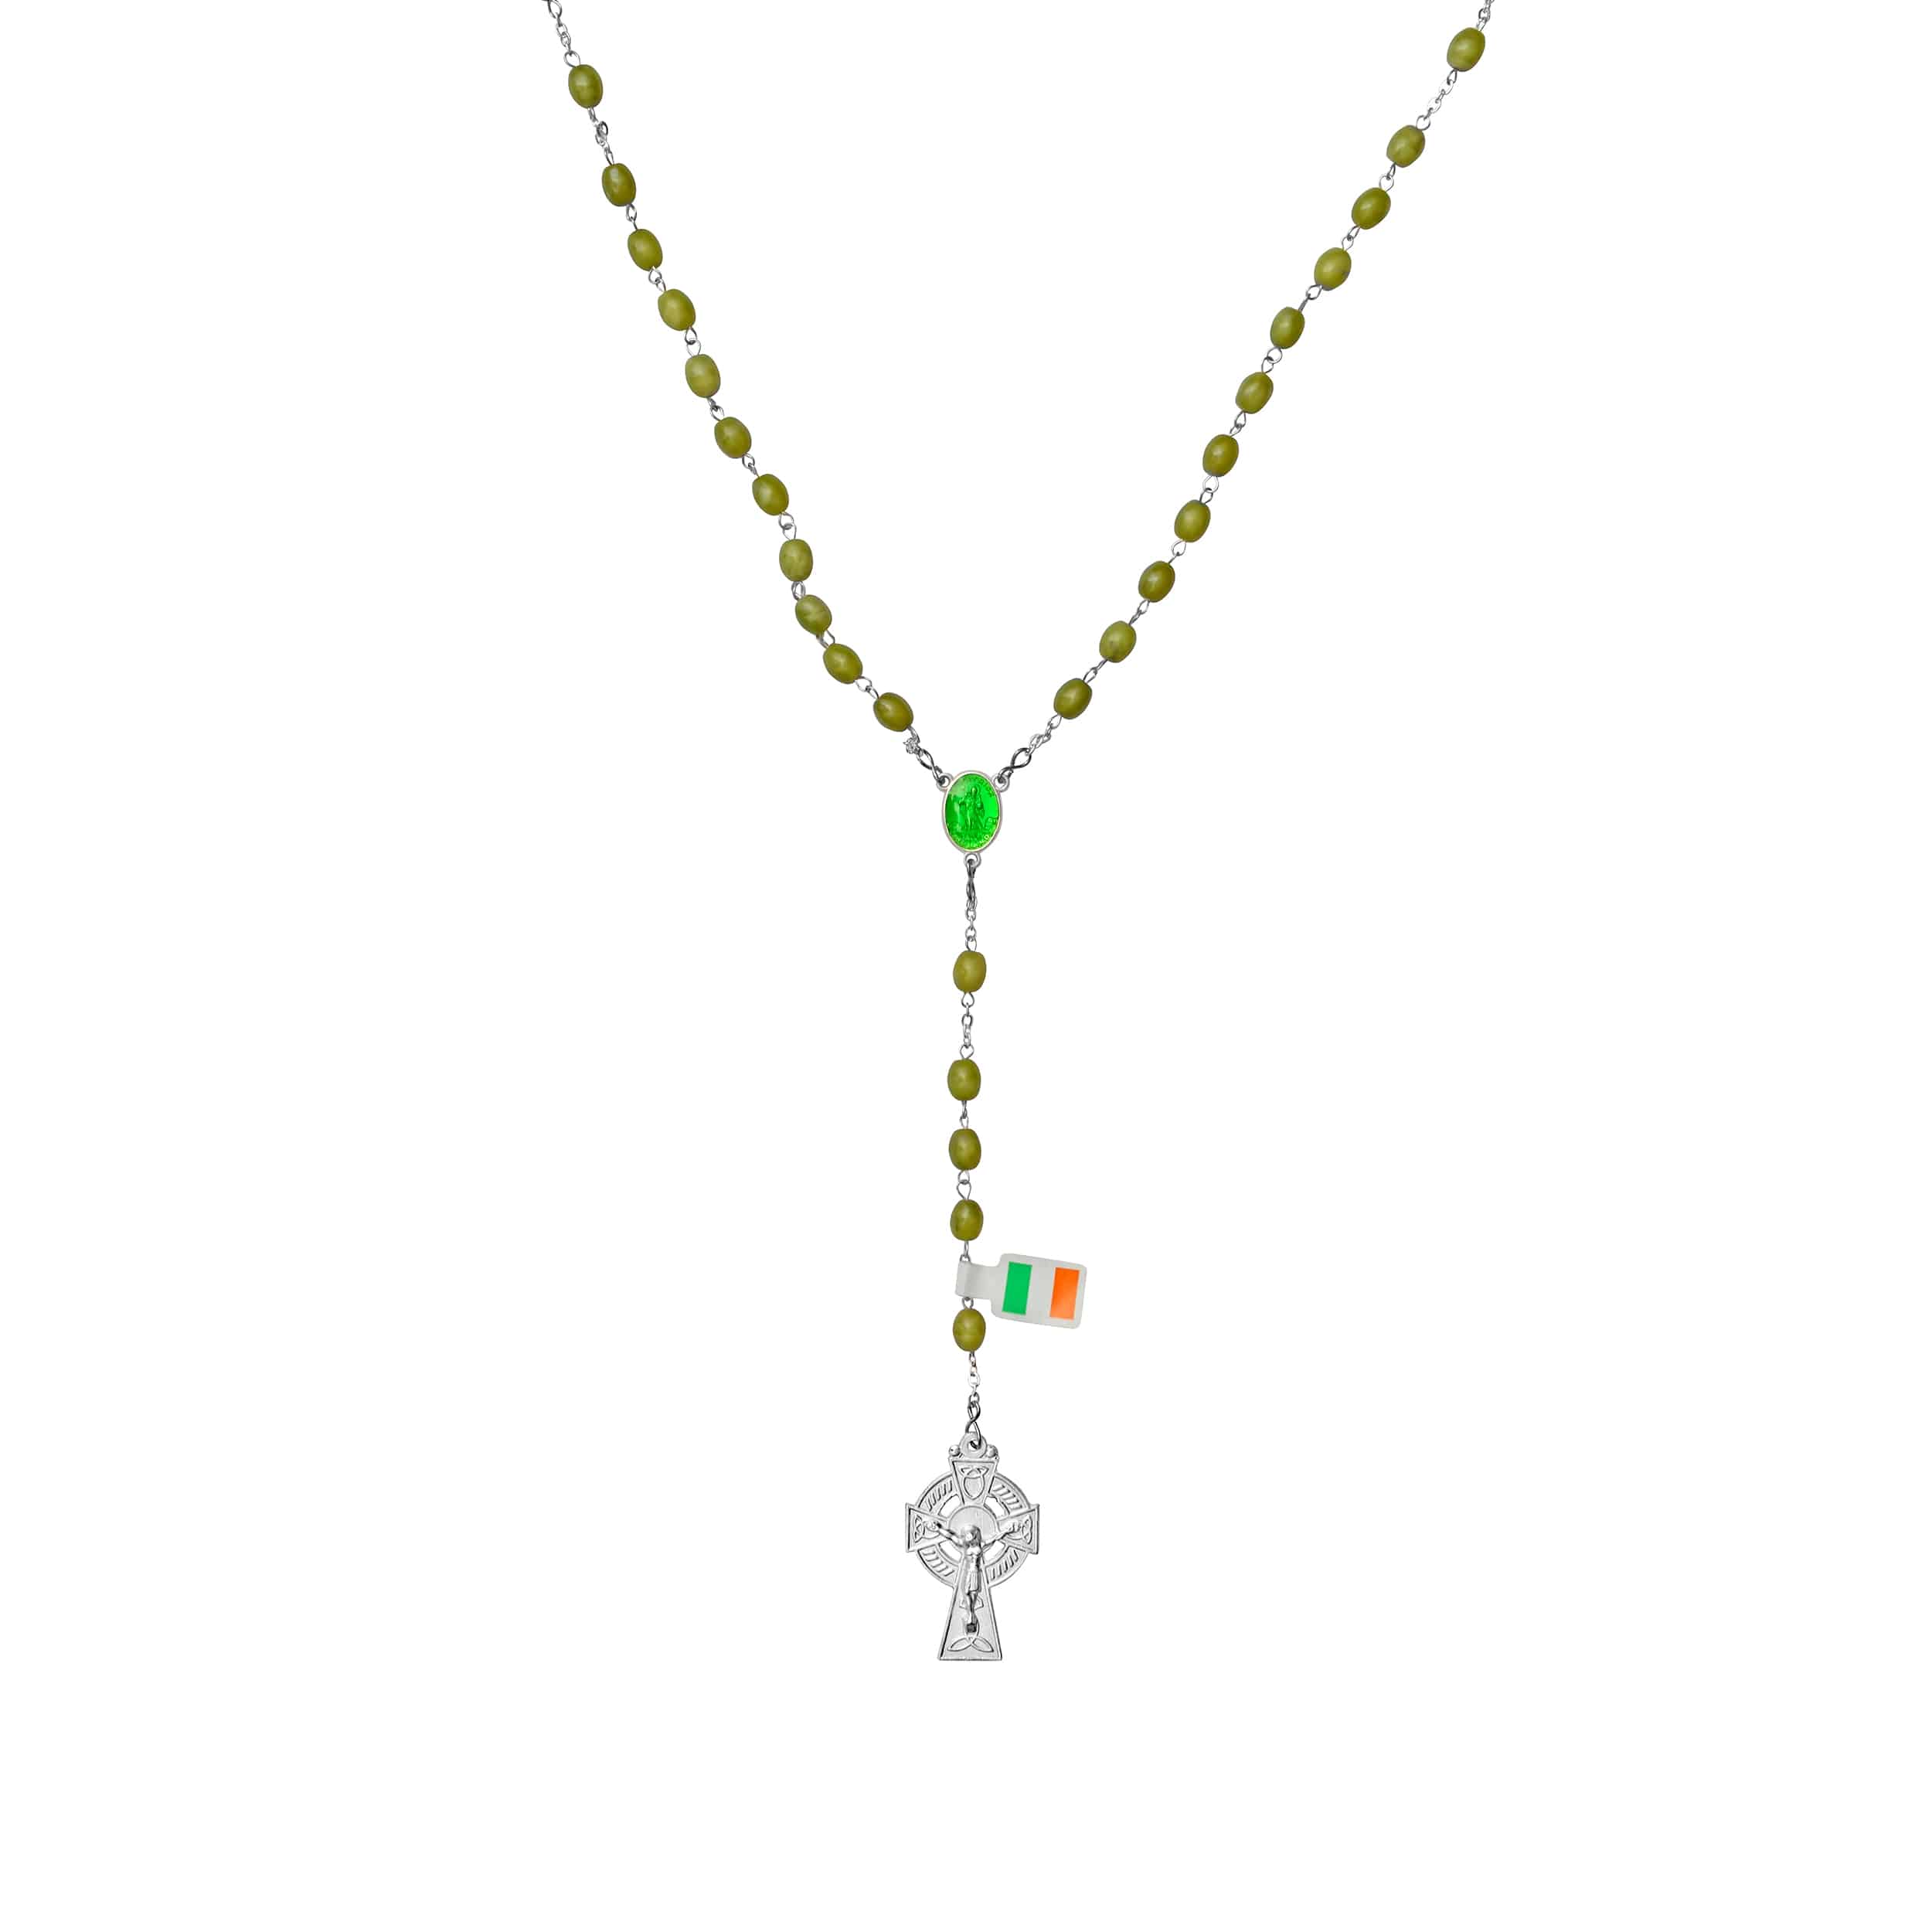 Connemara Marble Full Rosary with Oval Beads